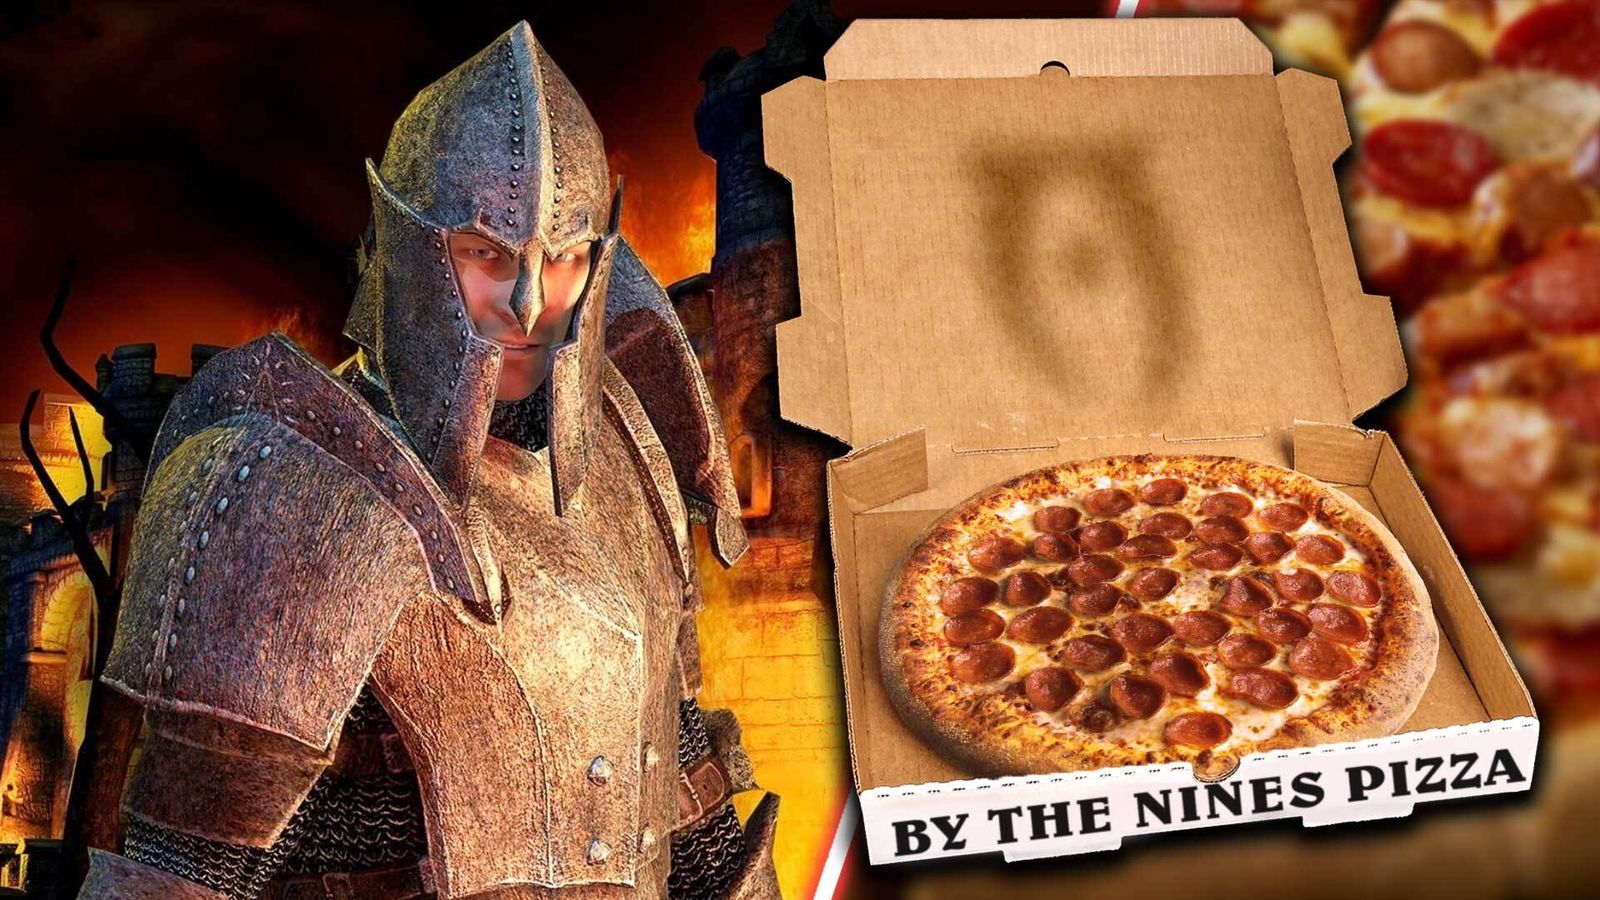 An image of a pizza in Oblivion.